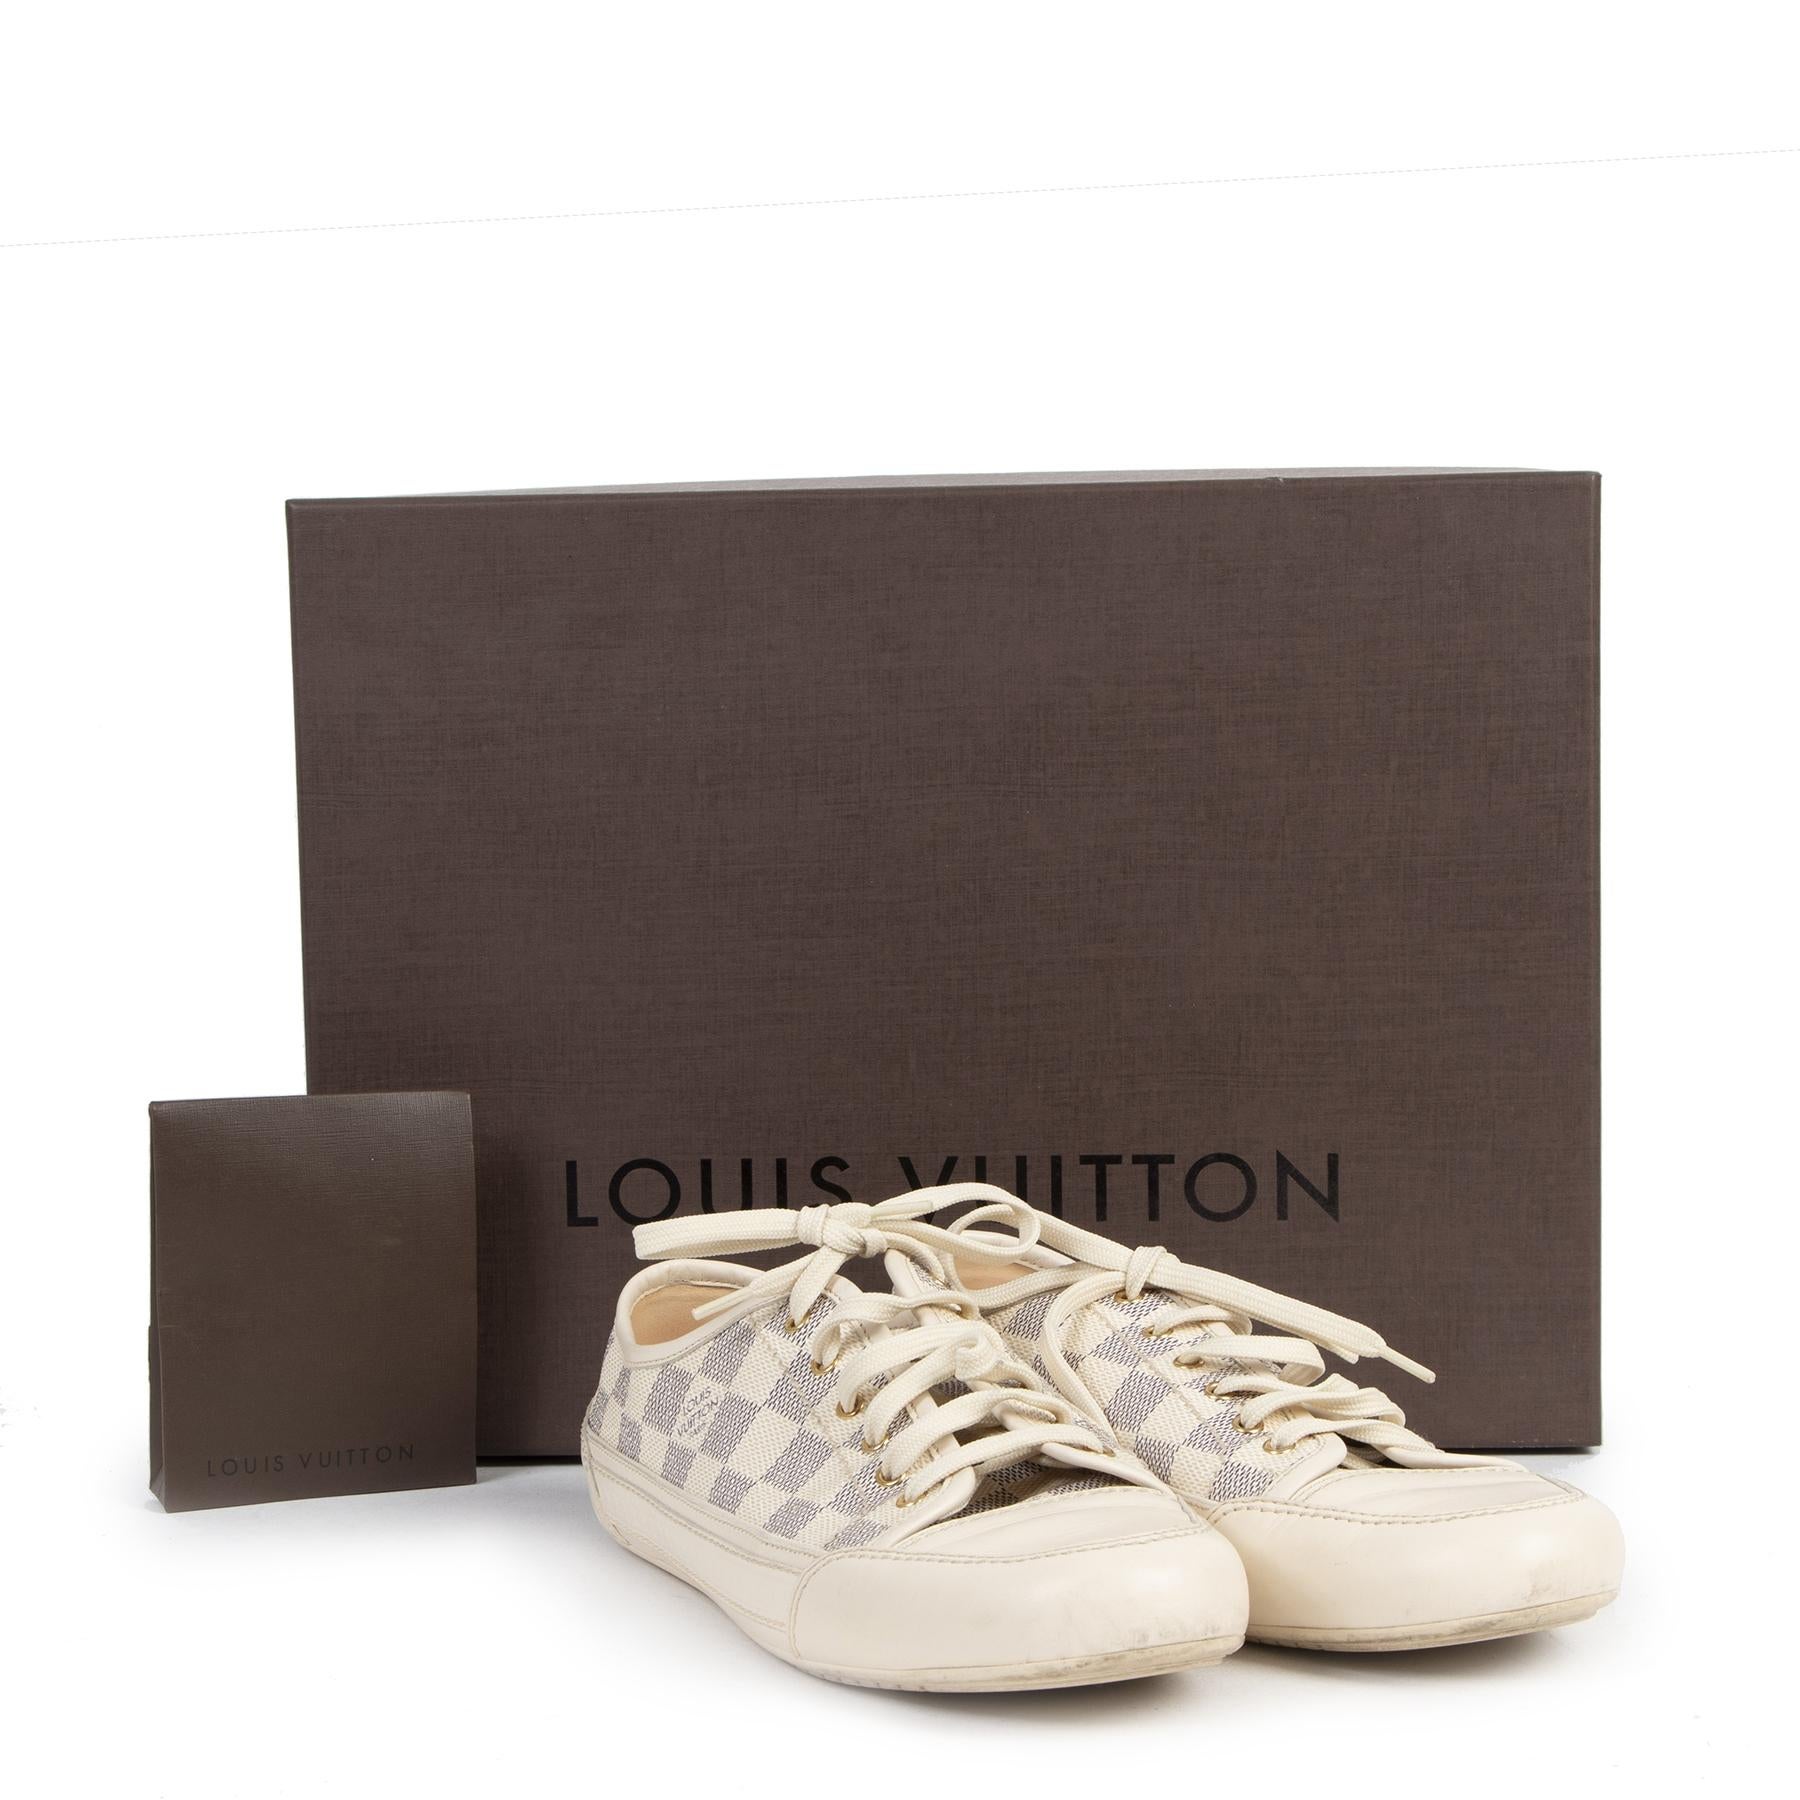 Very good condition

Louis Vuitton Damier Azur Sneakers - Size 40

These Louis Vuitton sneakers are the perfect mix between comfort and luxury. The shoes are crafted in the iconic damier azur canvas and feature gold toned details and the LV logo